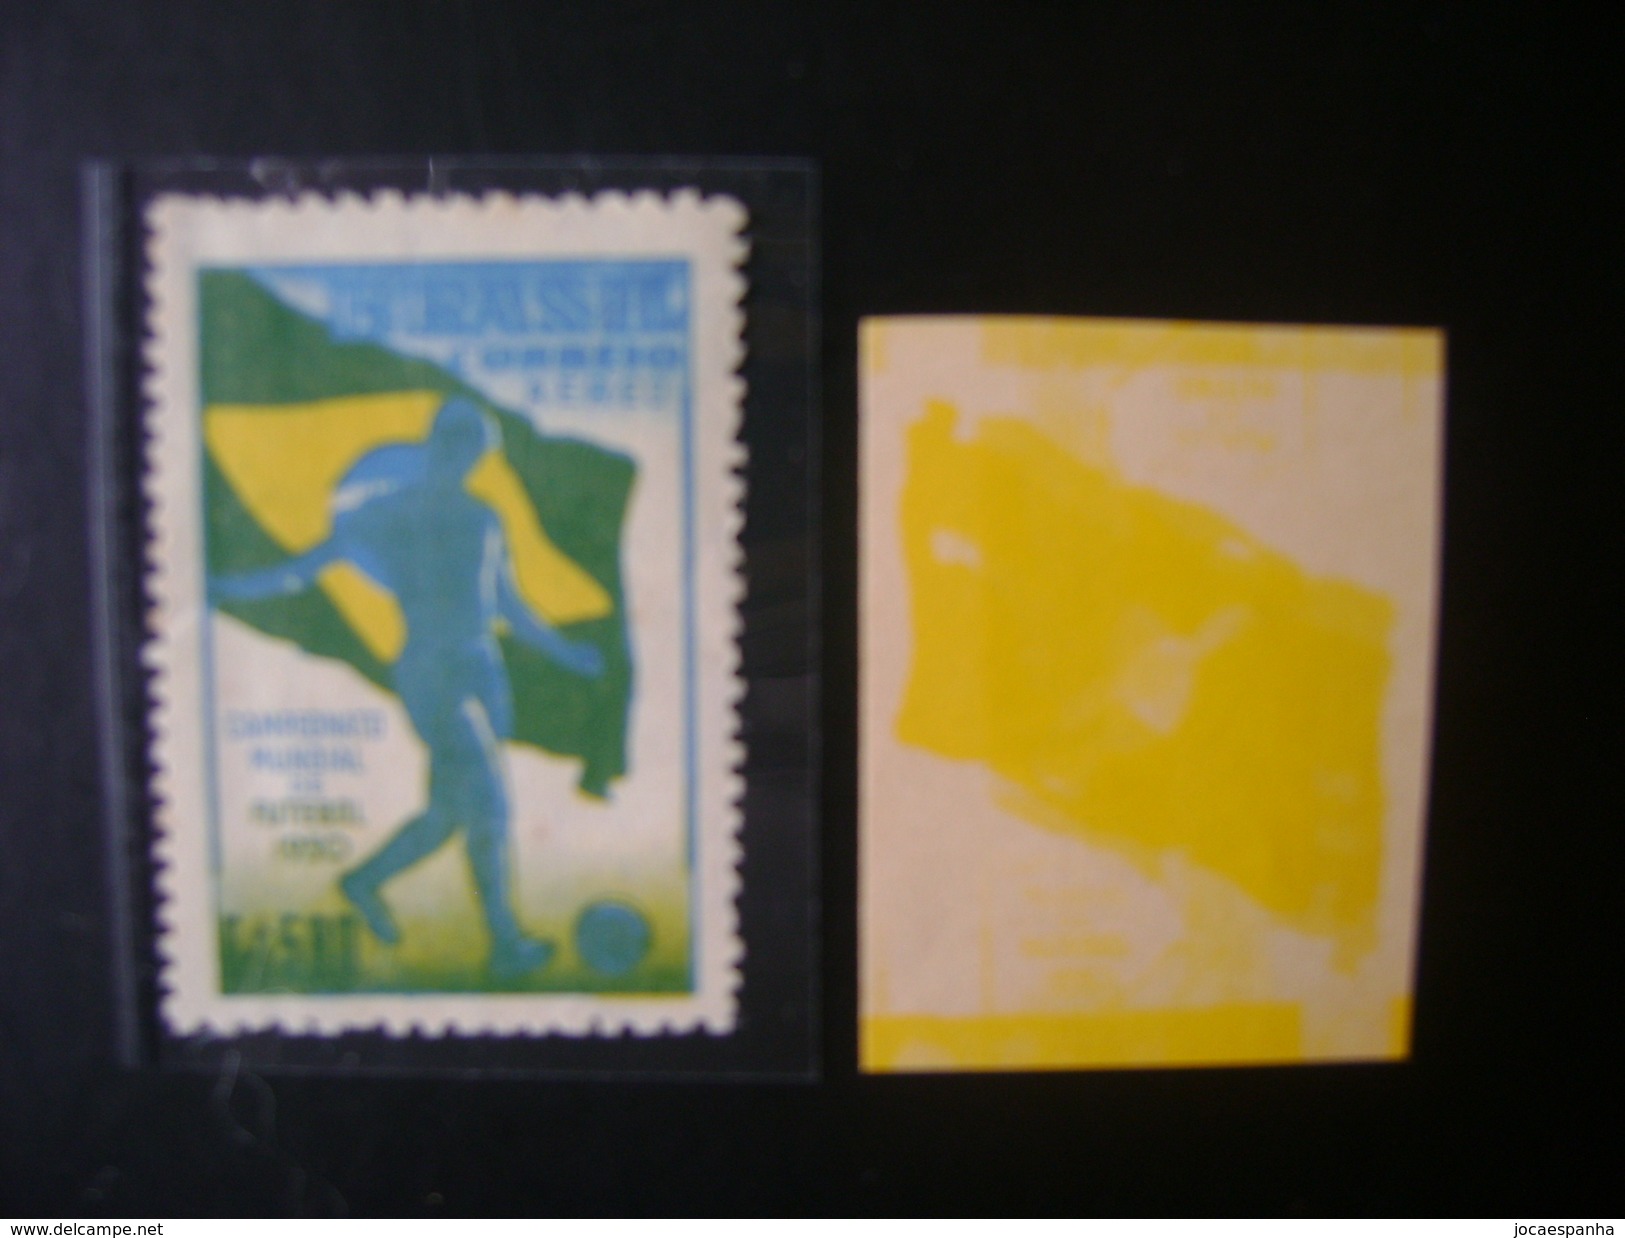 WORLD CUP OF FOOTBALL IN BRAZIL 1950 - A-76, PROOF YELLOW COLOR WITH DISPLACEMENT IN THE STATE - 1950 – Brazilië